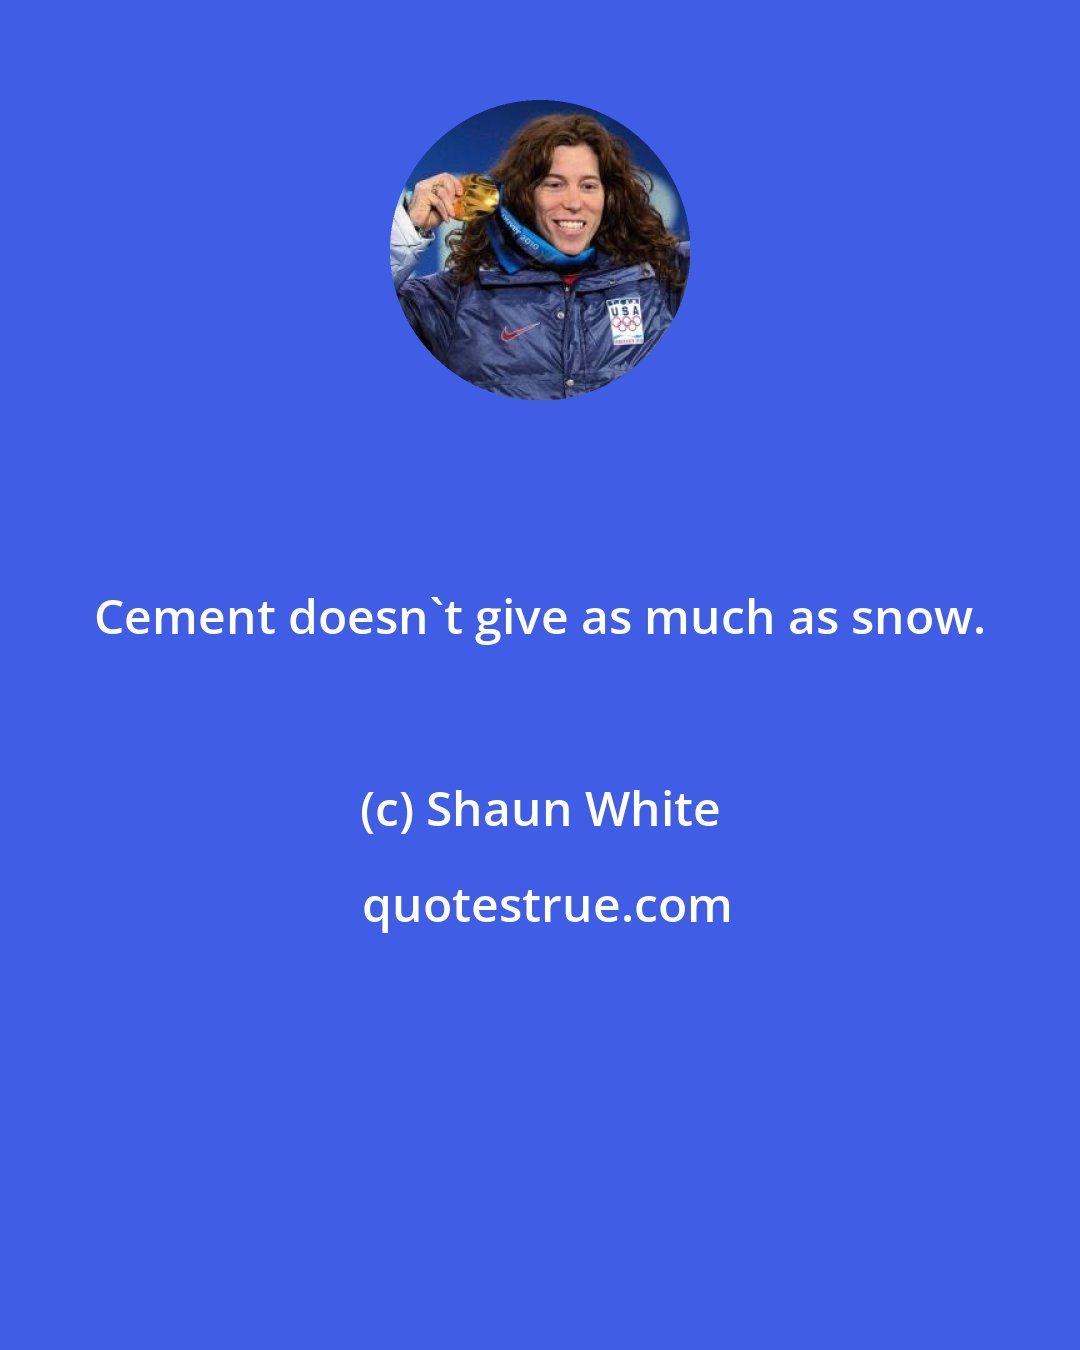 Shaun White: Cement doesn't give as much as snow.